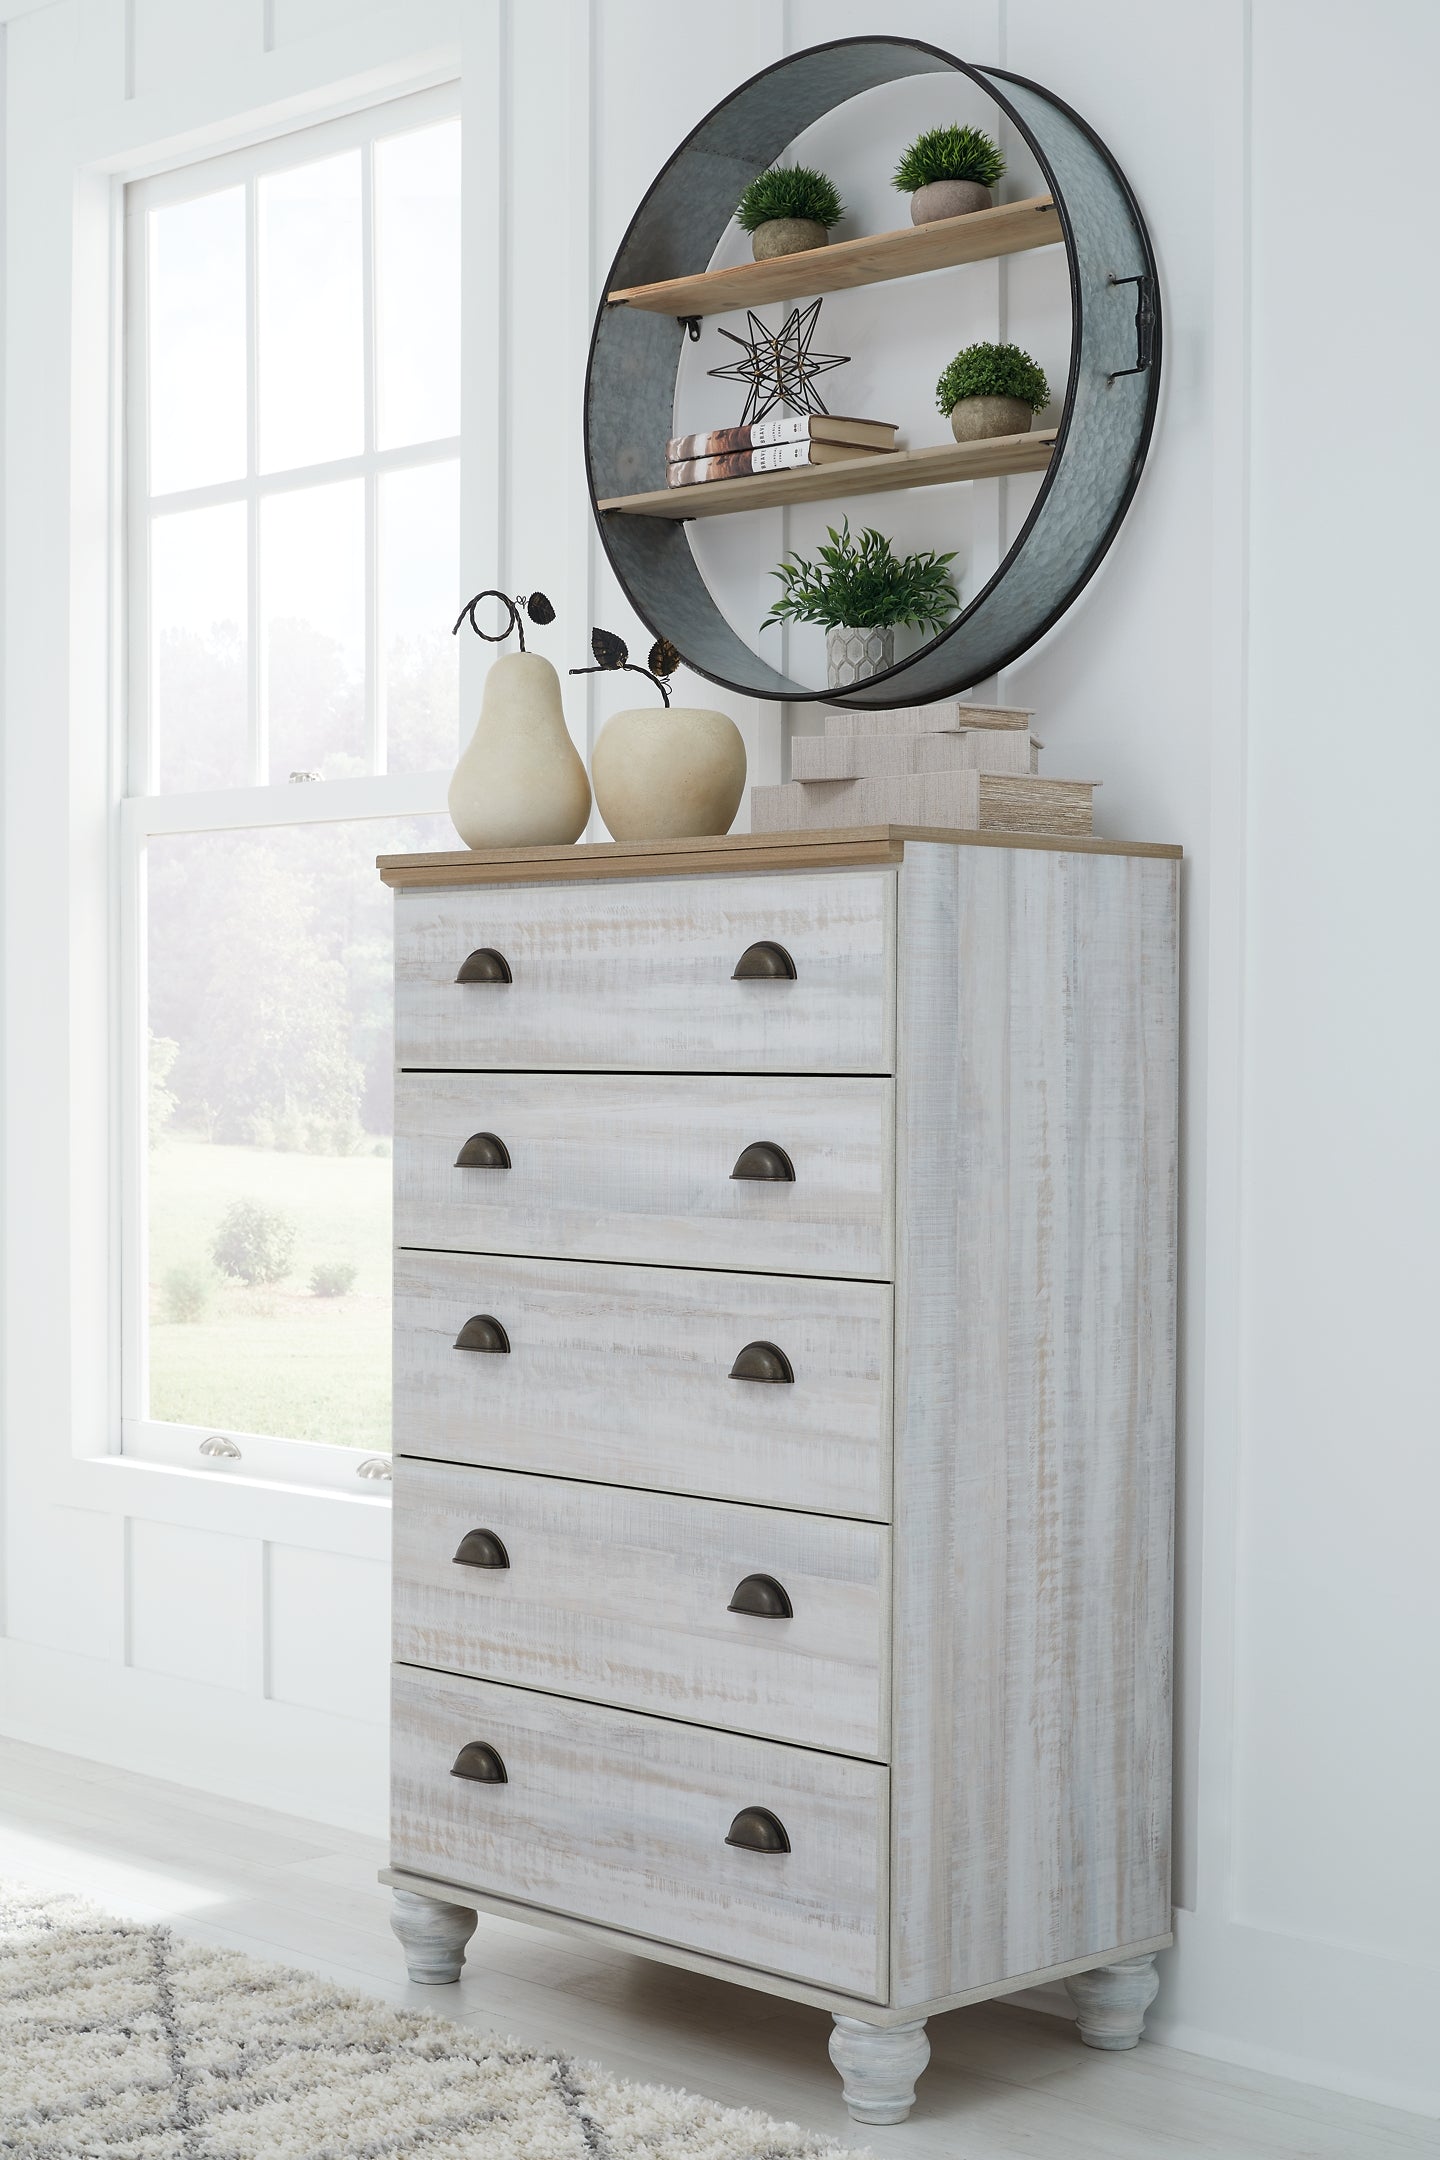 Haven Bay King Panel Storage Bed with Mirrored Dresser and Chest